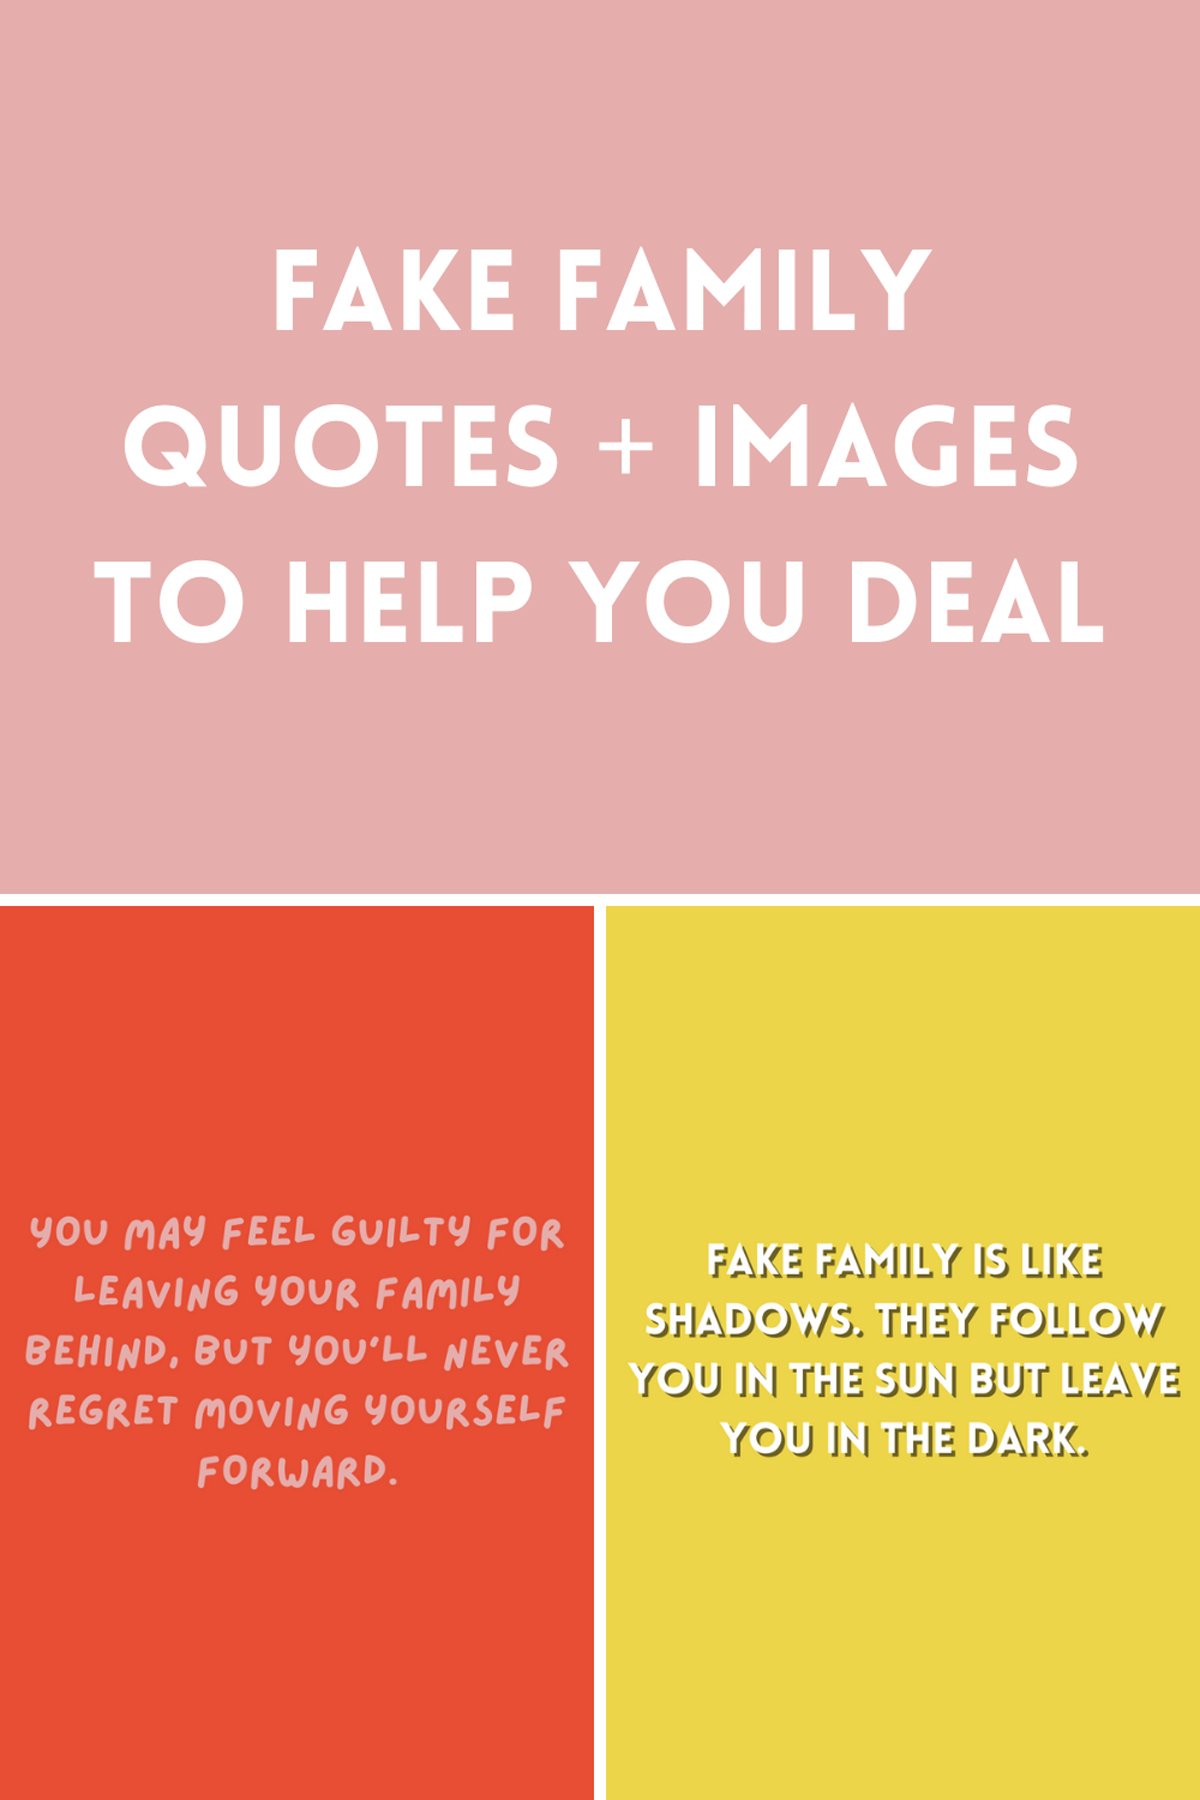 Fake Family Quotes and Images